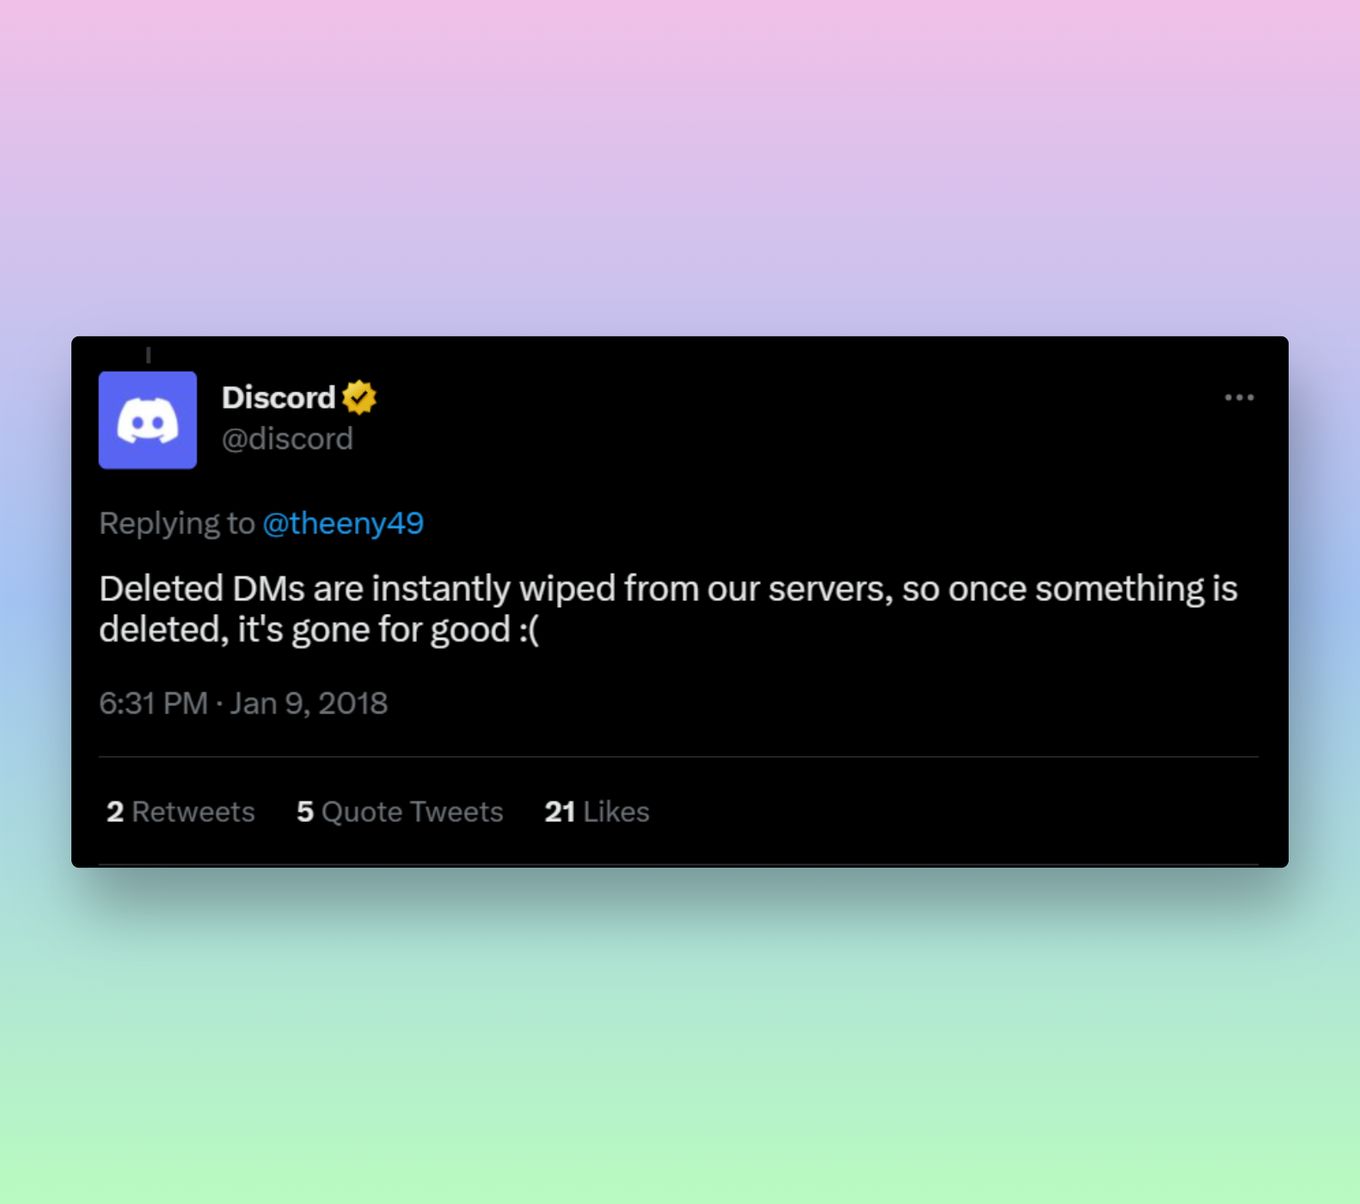 Discord announcement on Twitter about deleted DMs removed from server